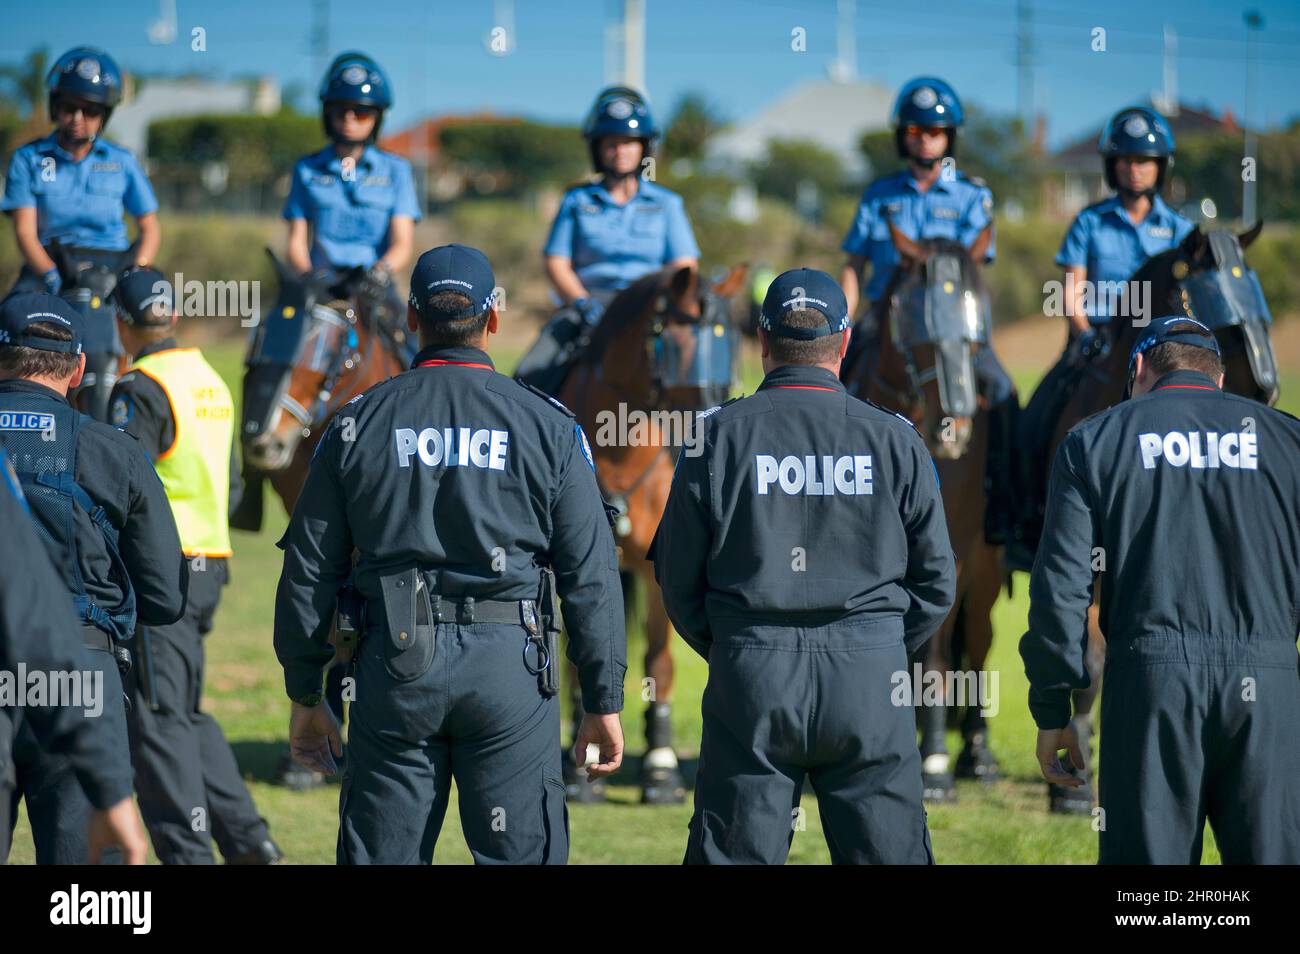 Western Australia Police (WAPOL) mounted police section in action. Stock Photo